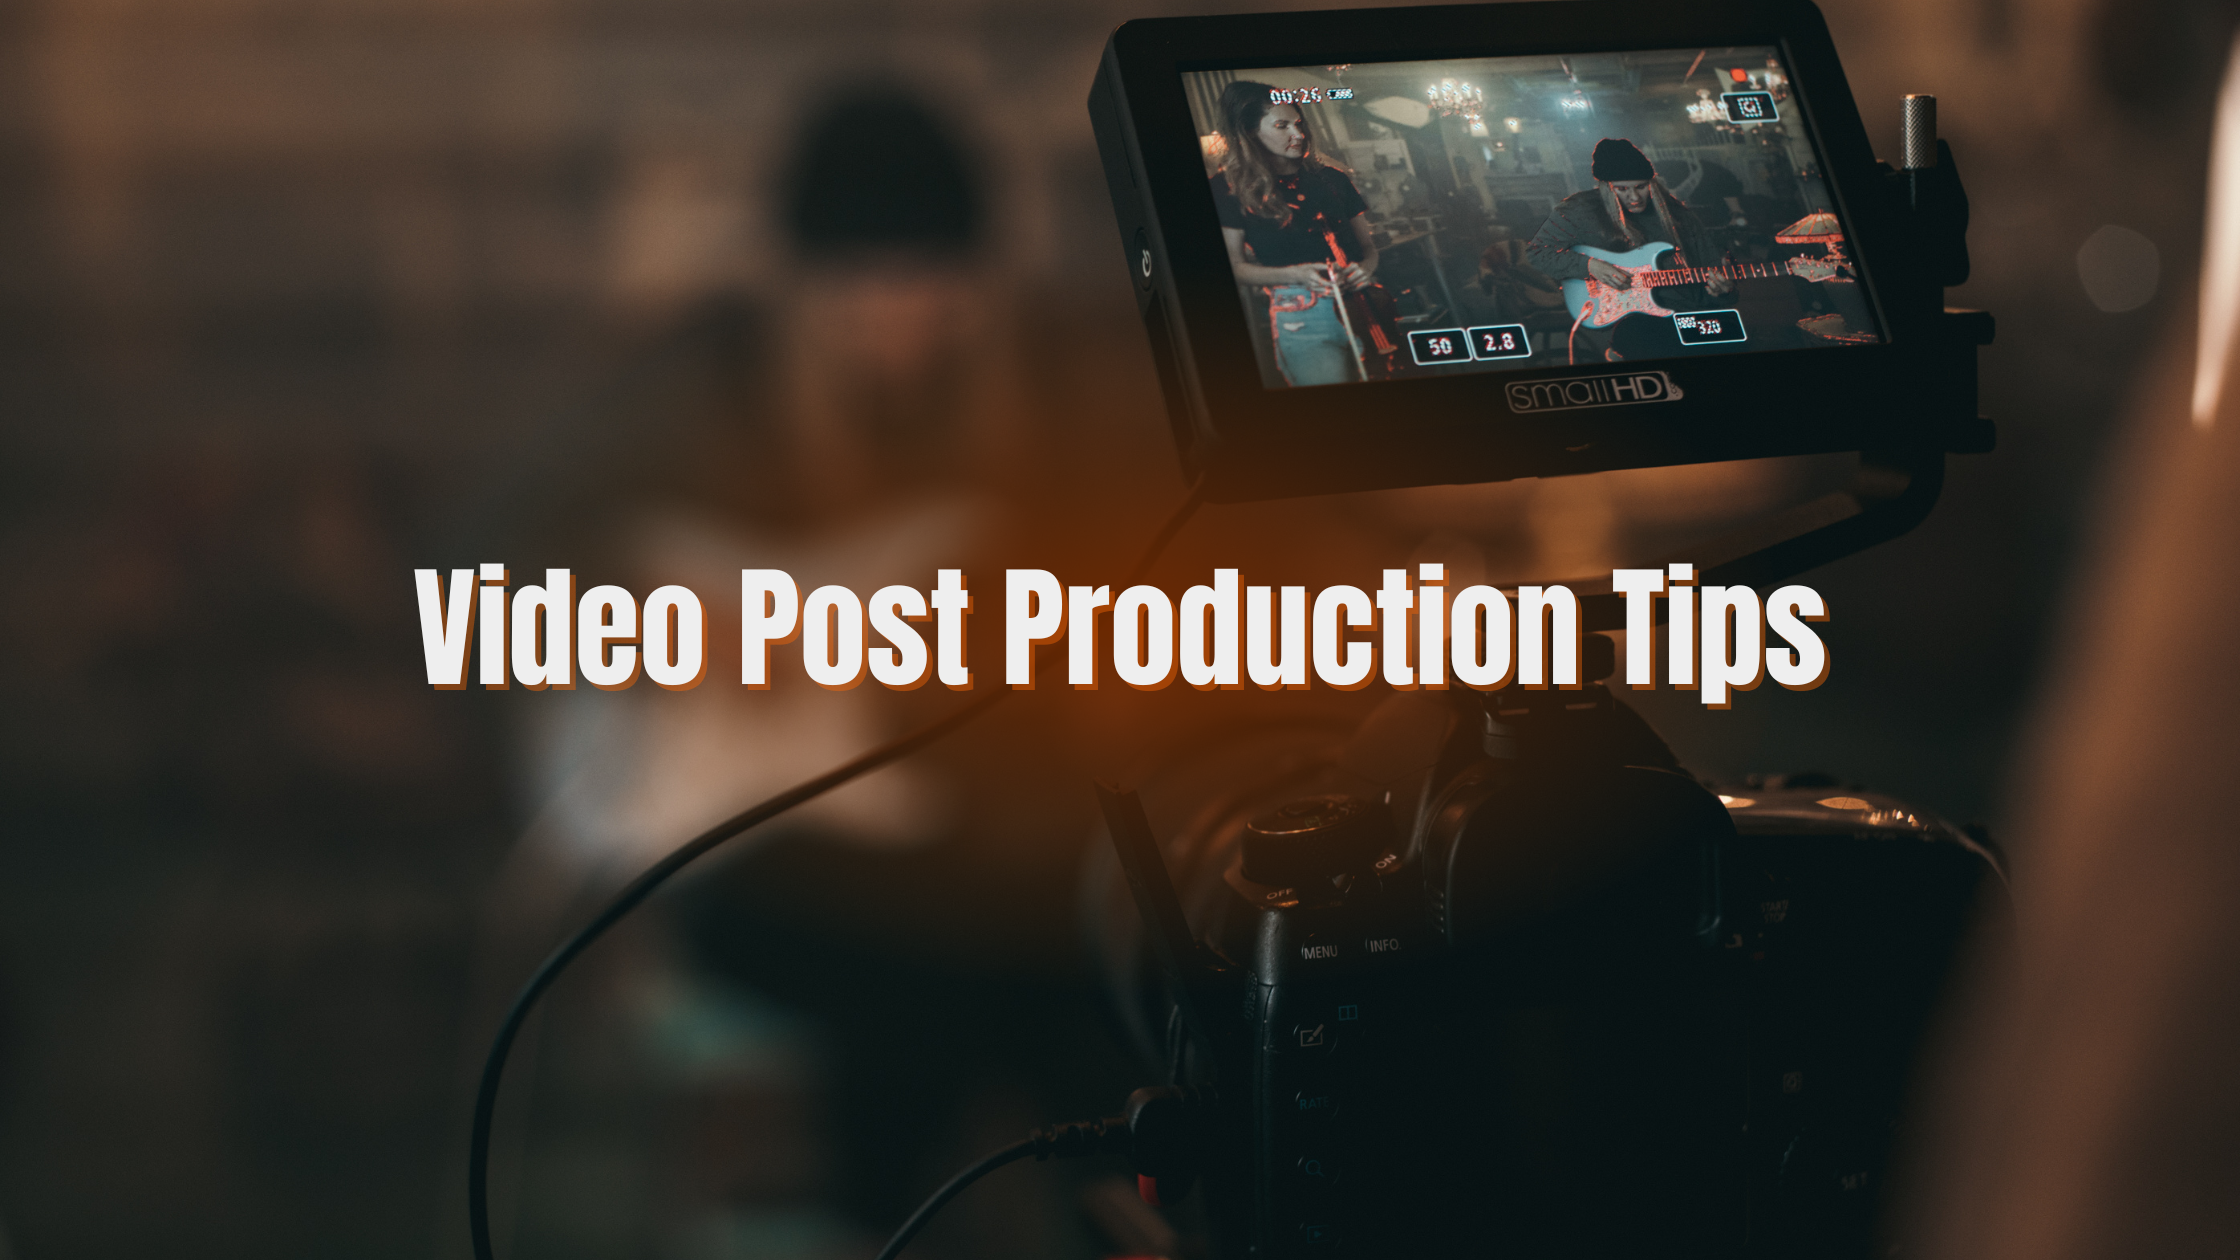 5 Video Post Production Tips to Make an Engaging Video